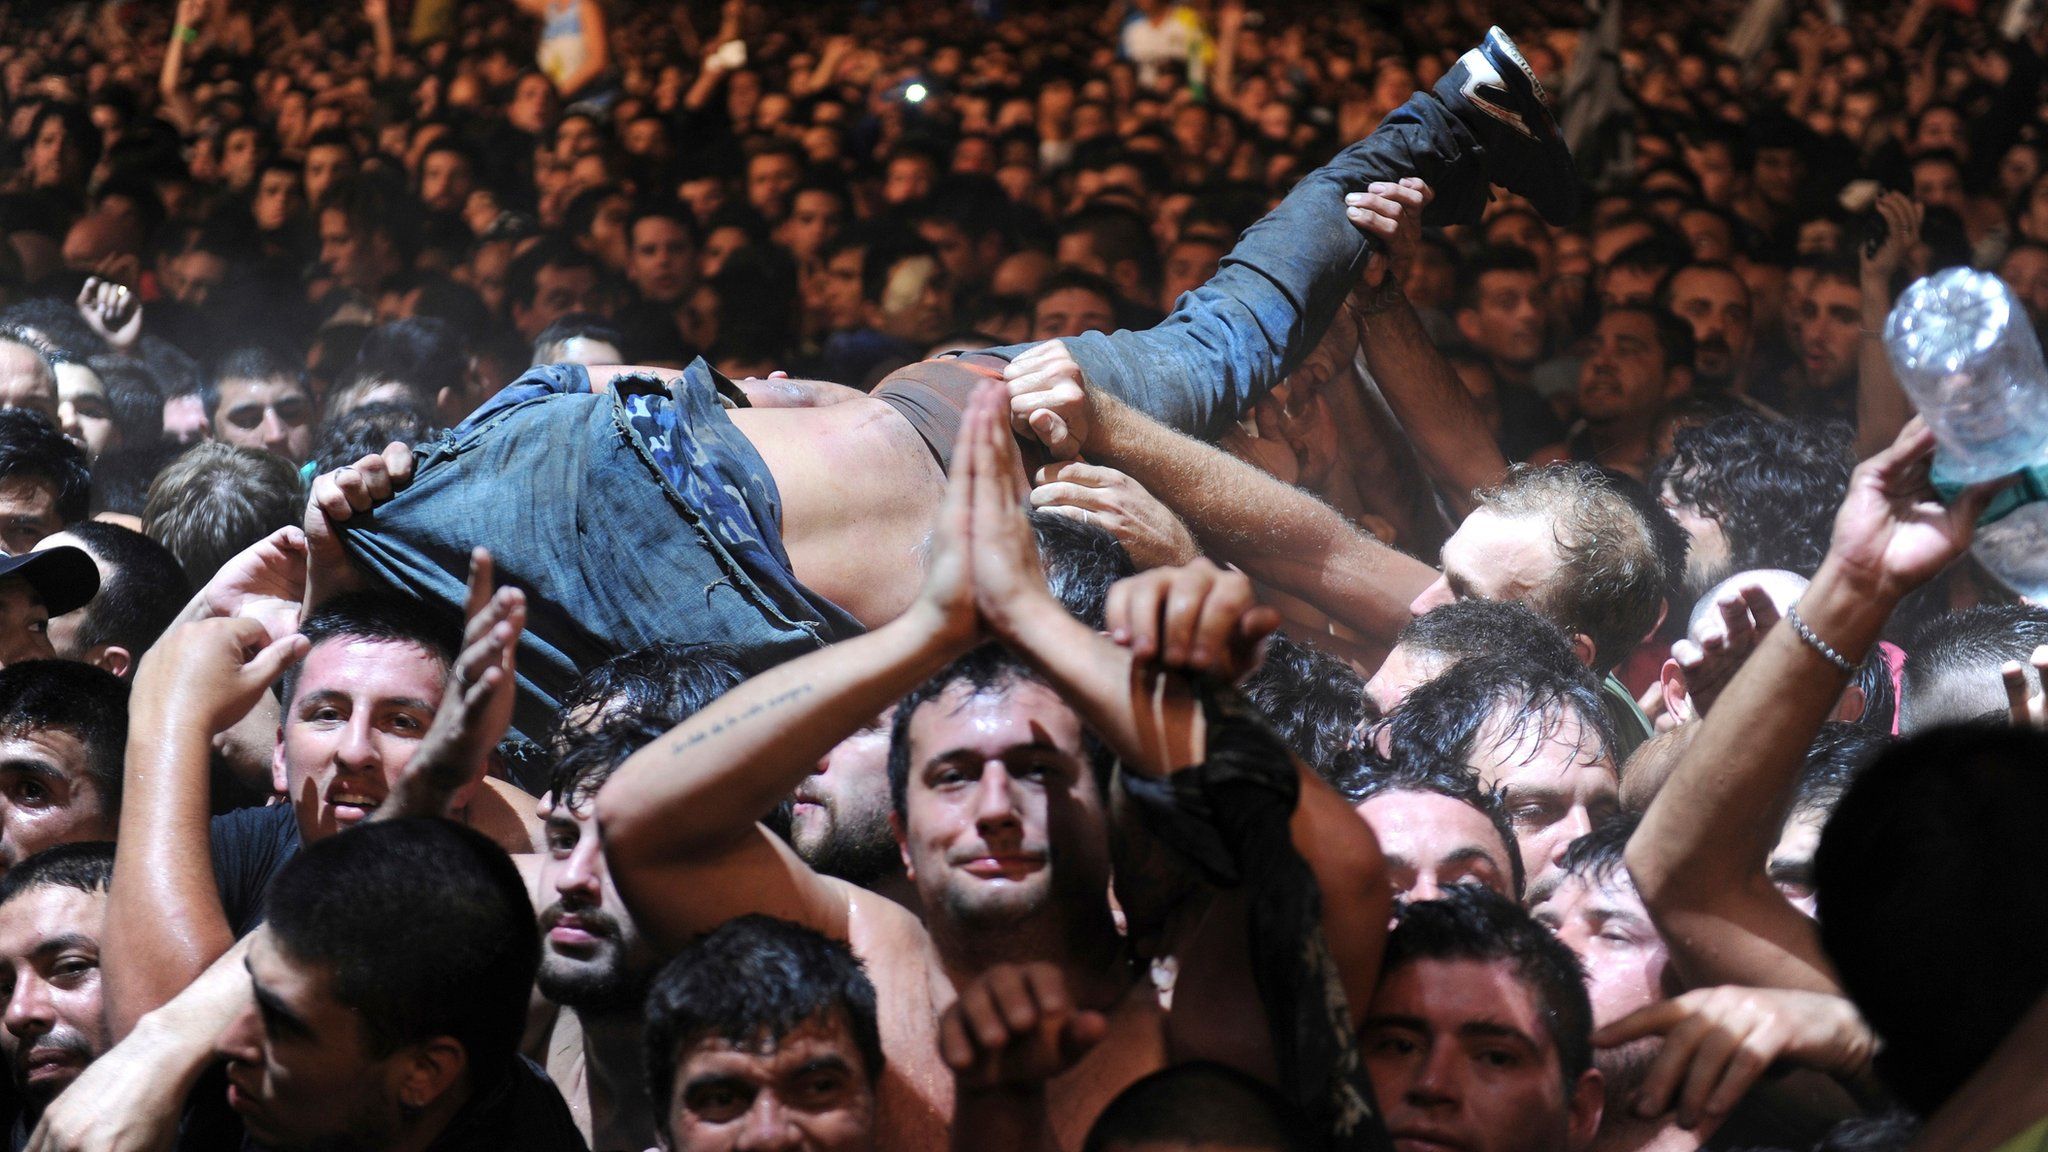 Fans in the mosh pit during Argentina singer Indio Solari's show in Argentina, 11 March 2017